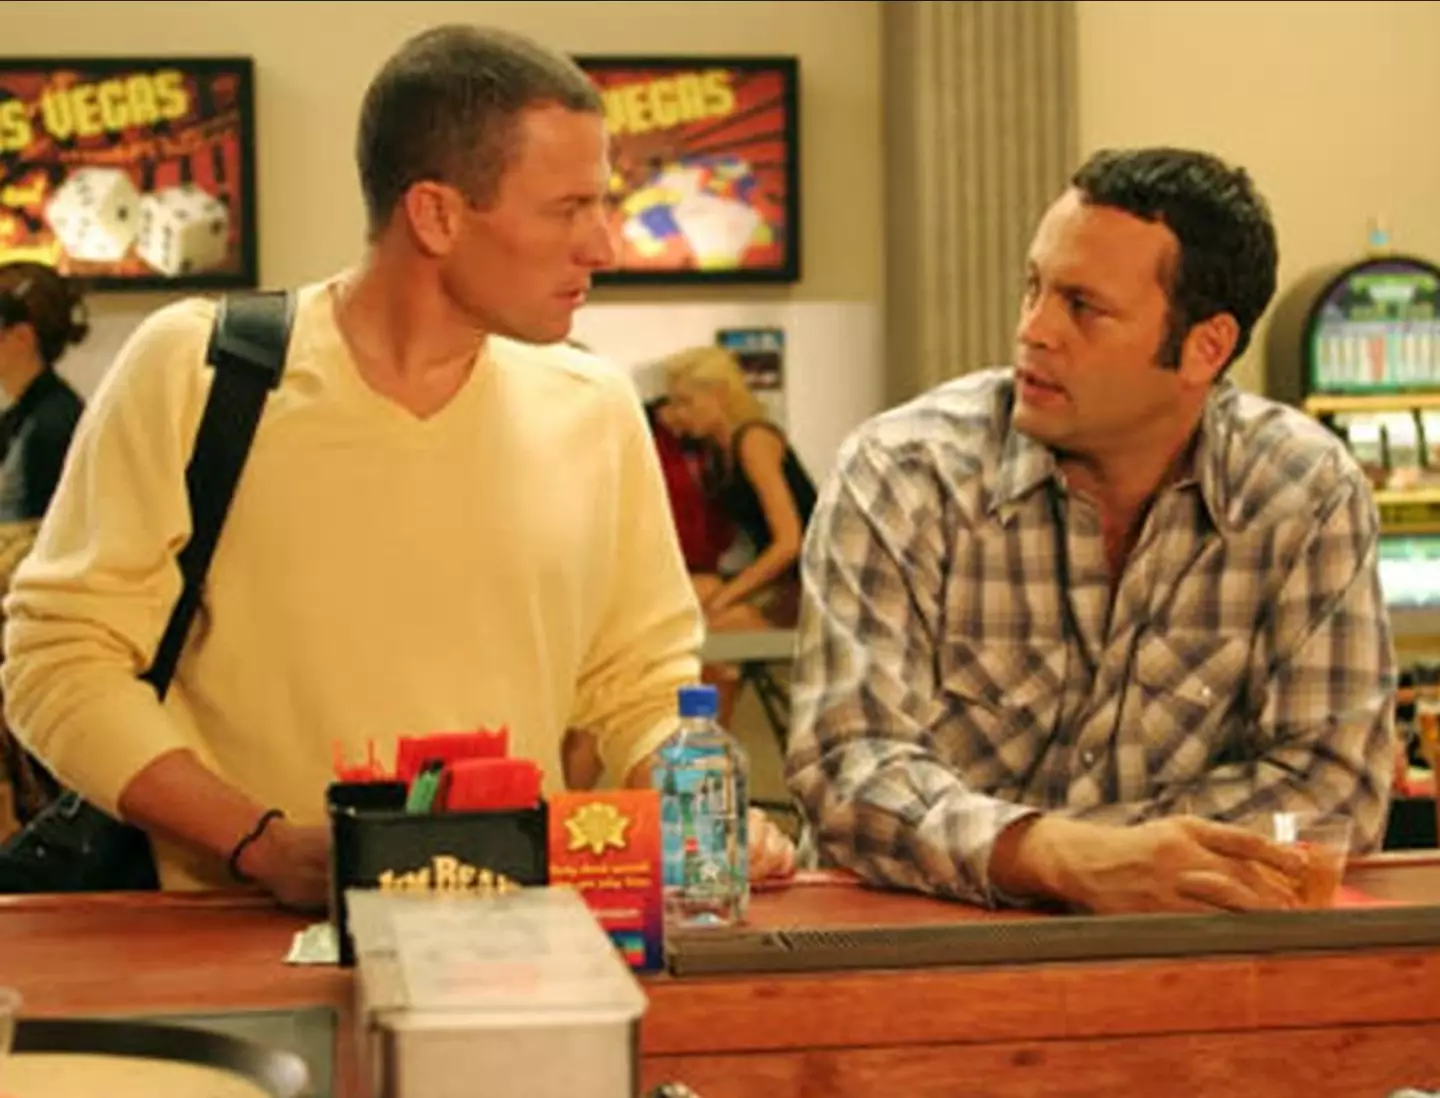 Lance Armstrong played a cameo role in the movie.